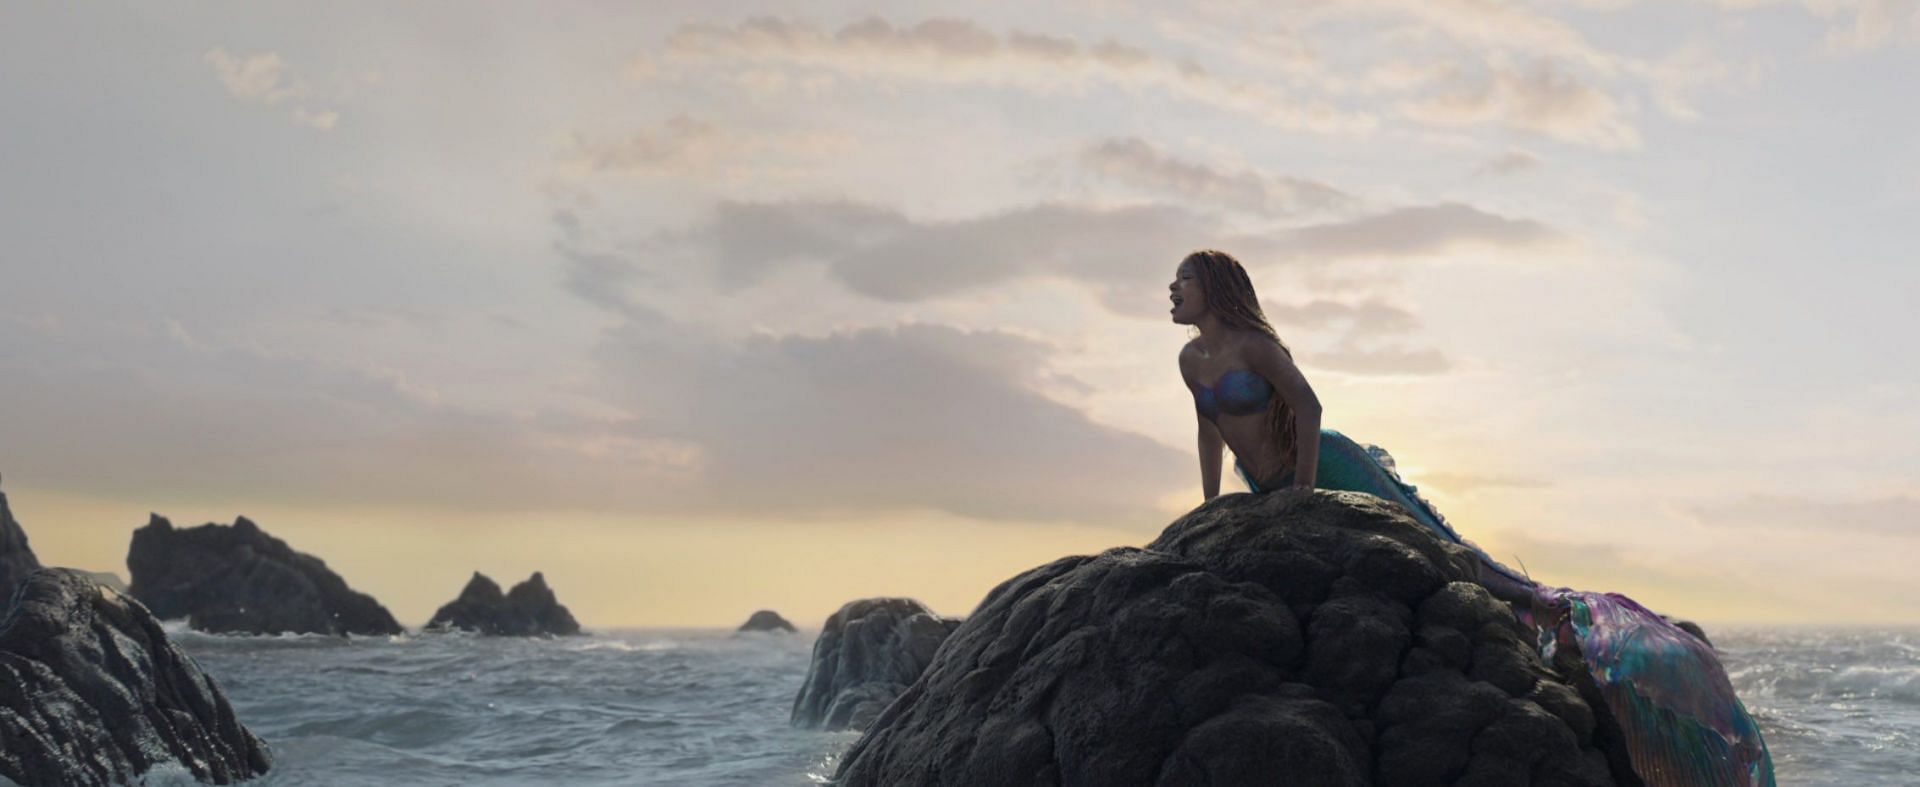 Will The Little Mermaid 2 Swim to the Surface? Stars express hopes for a continuation of the enchanting tale (Image via Disney)